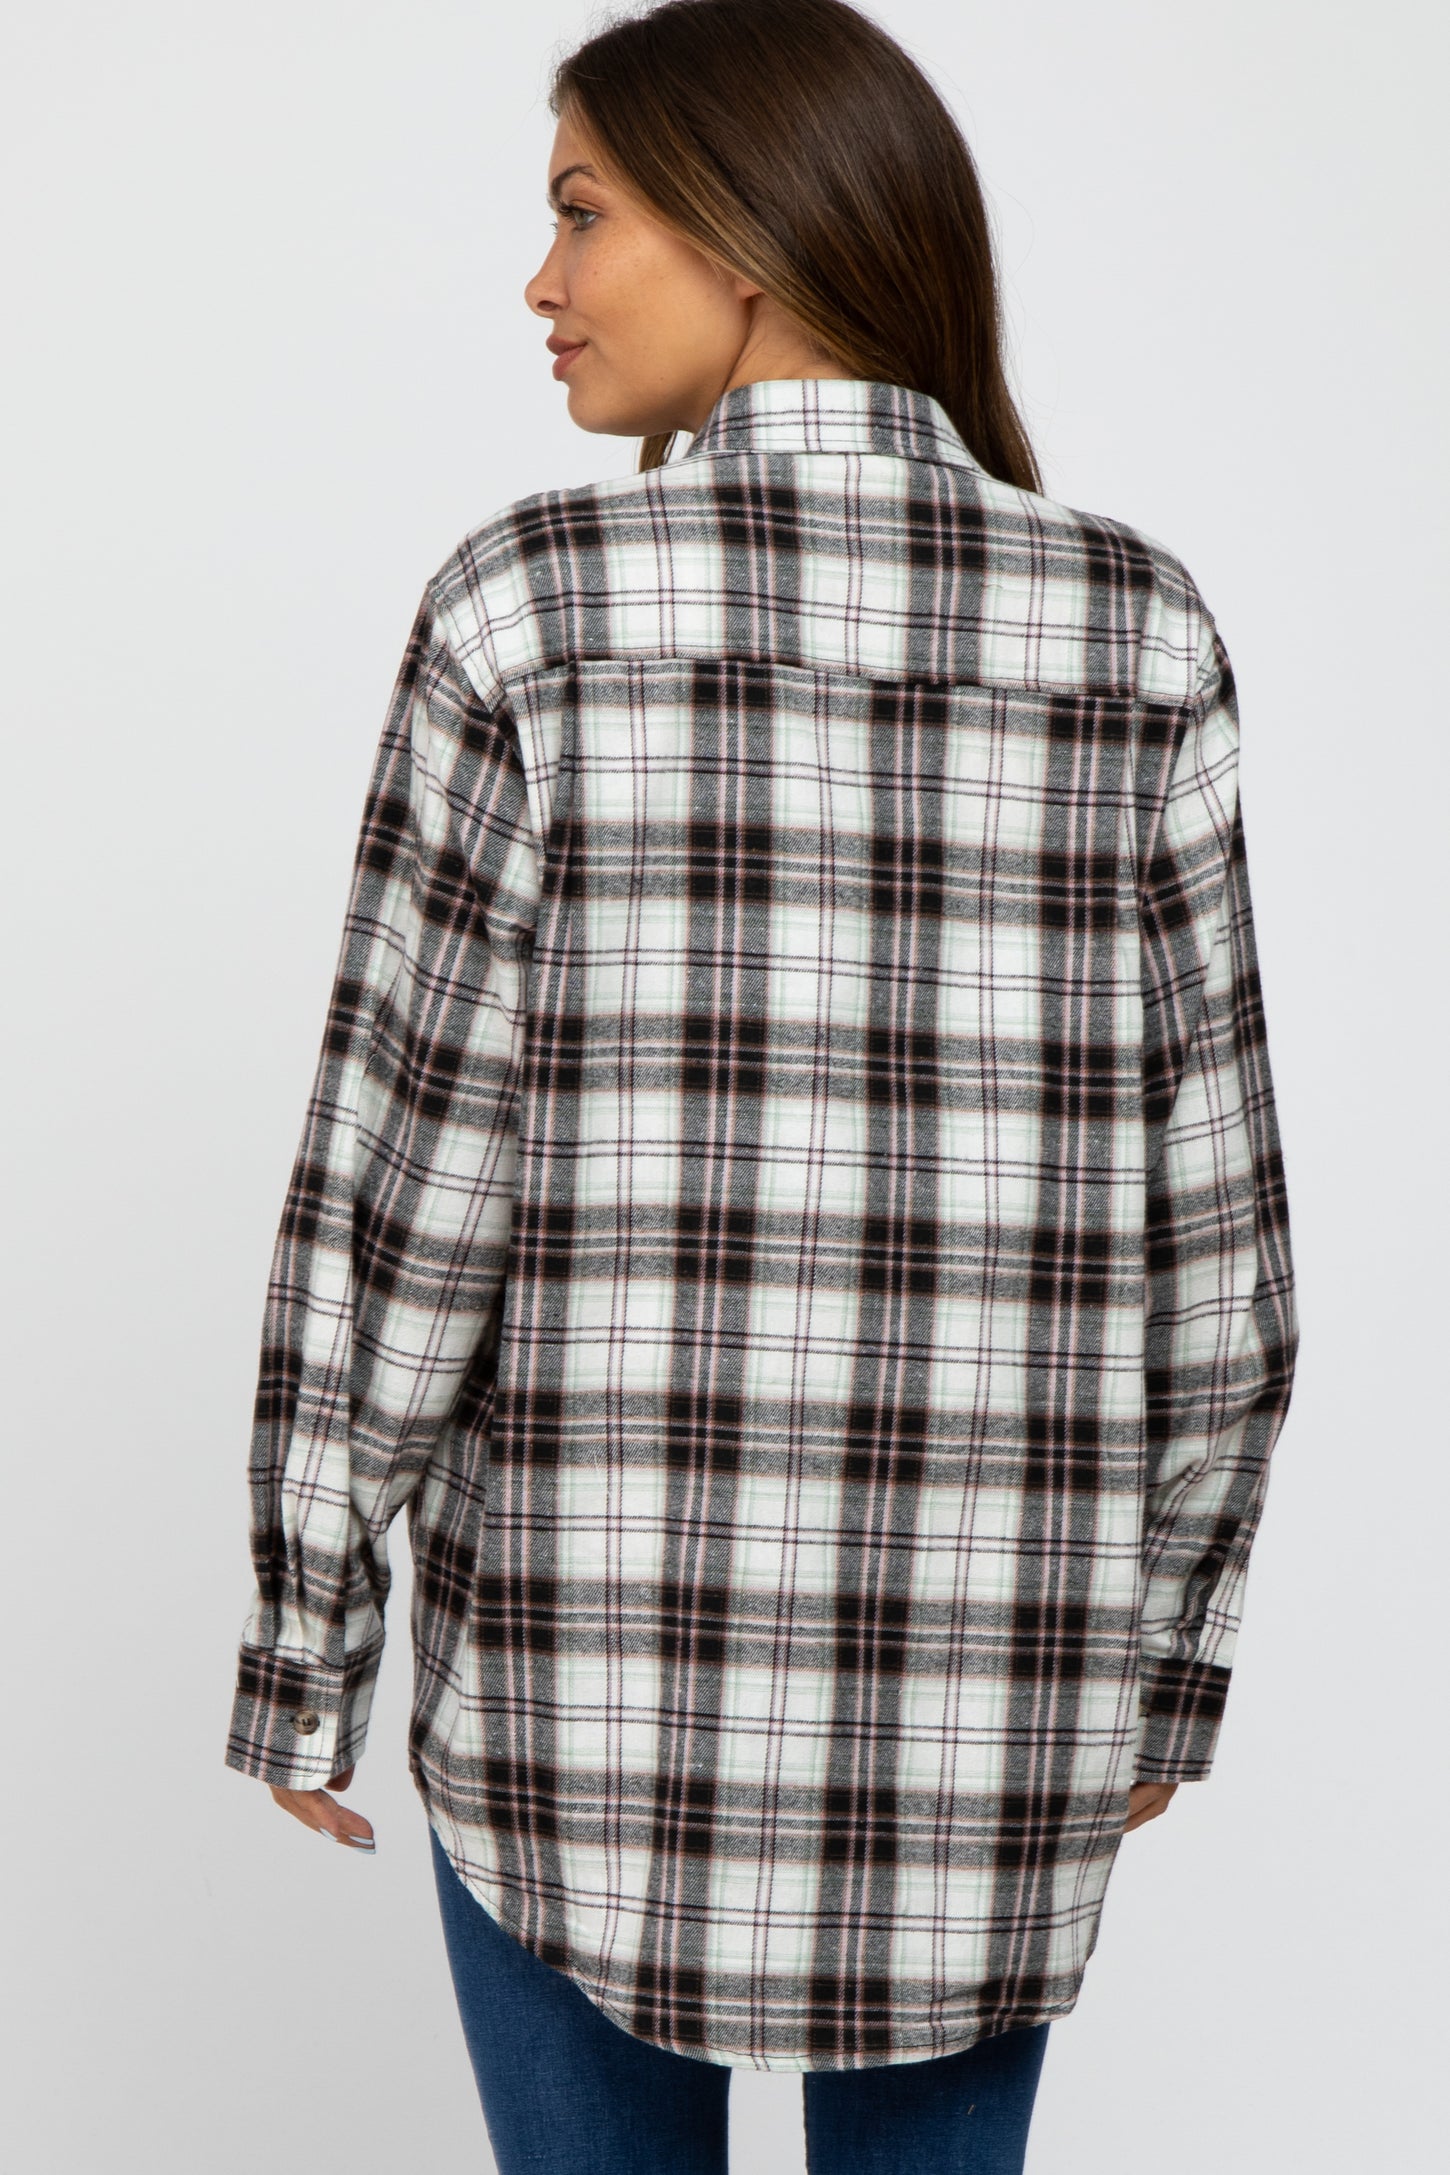 Black Plaid Button Up Collared Flannel Maternity Top– PinkBlush